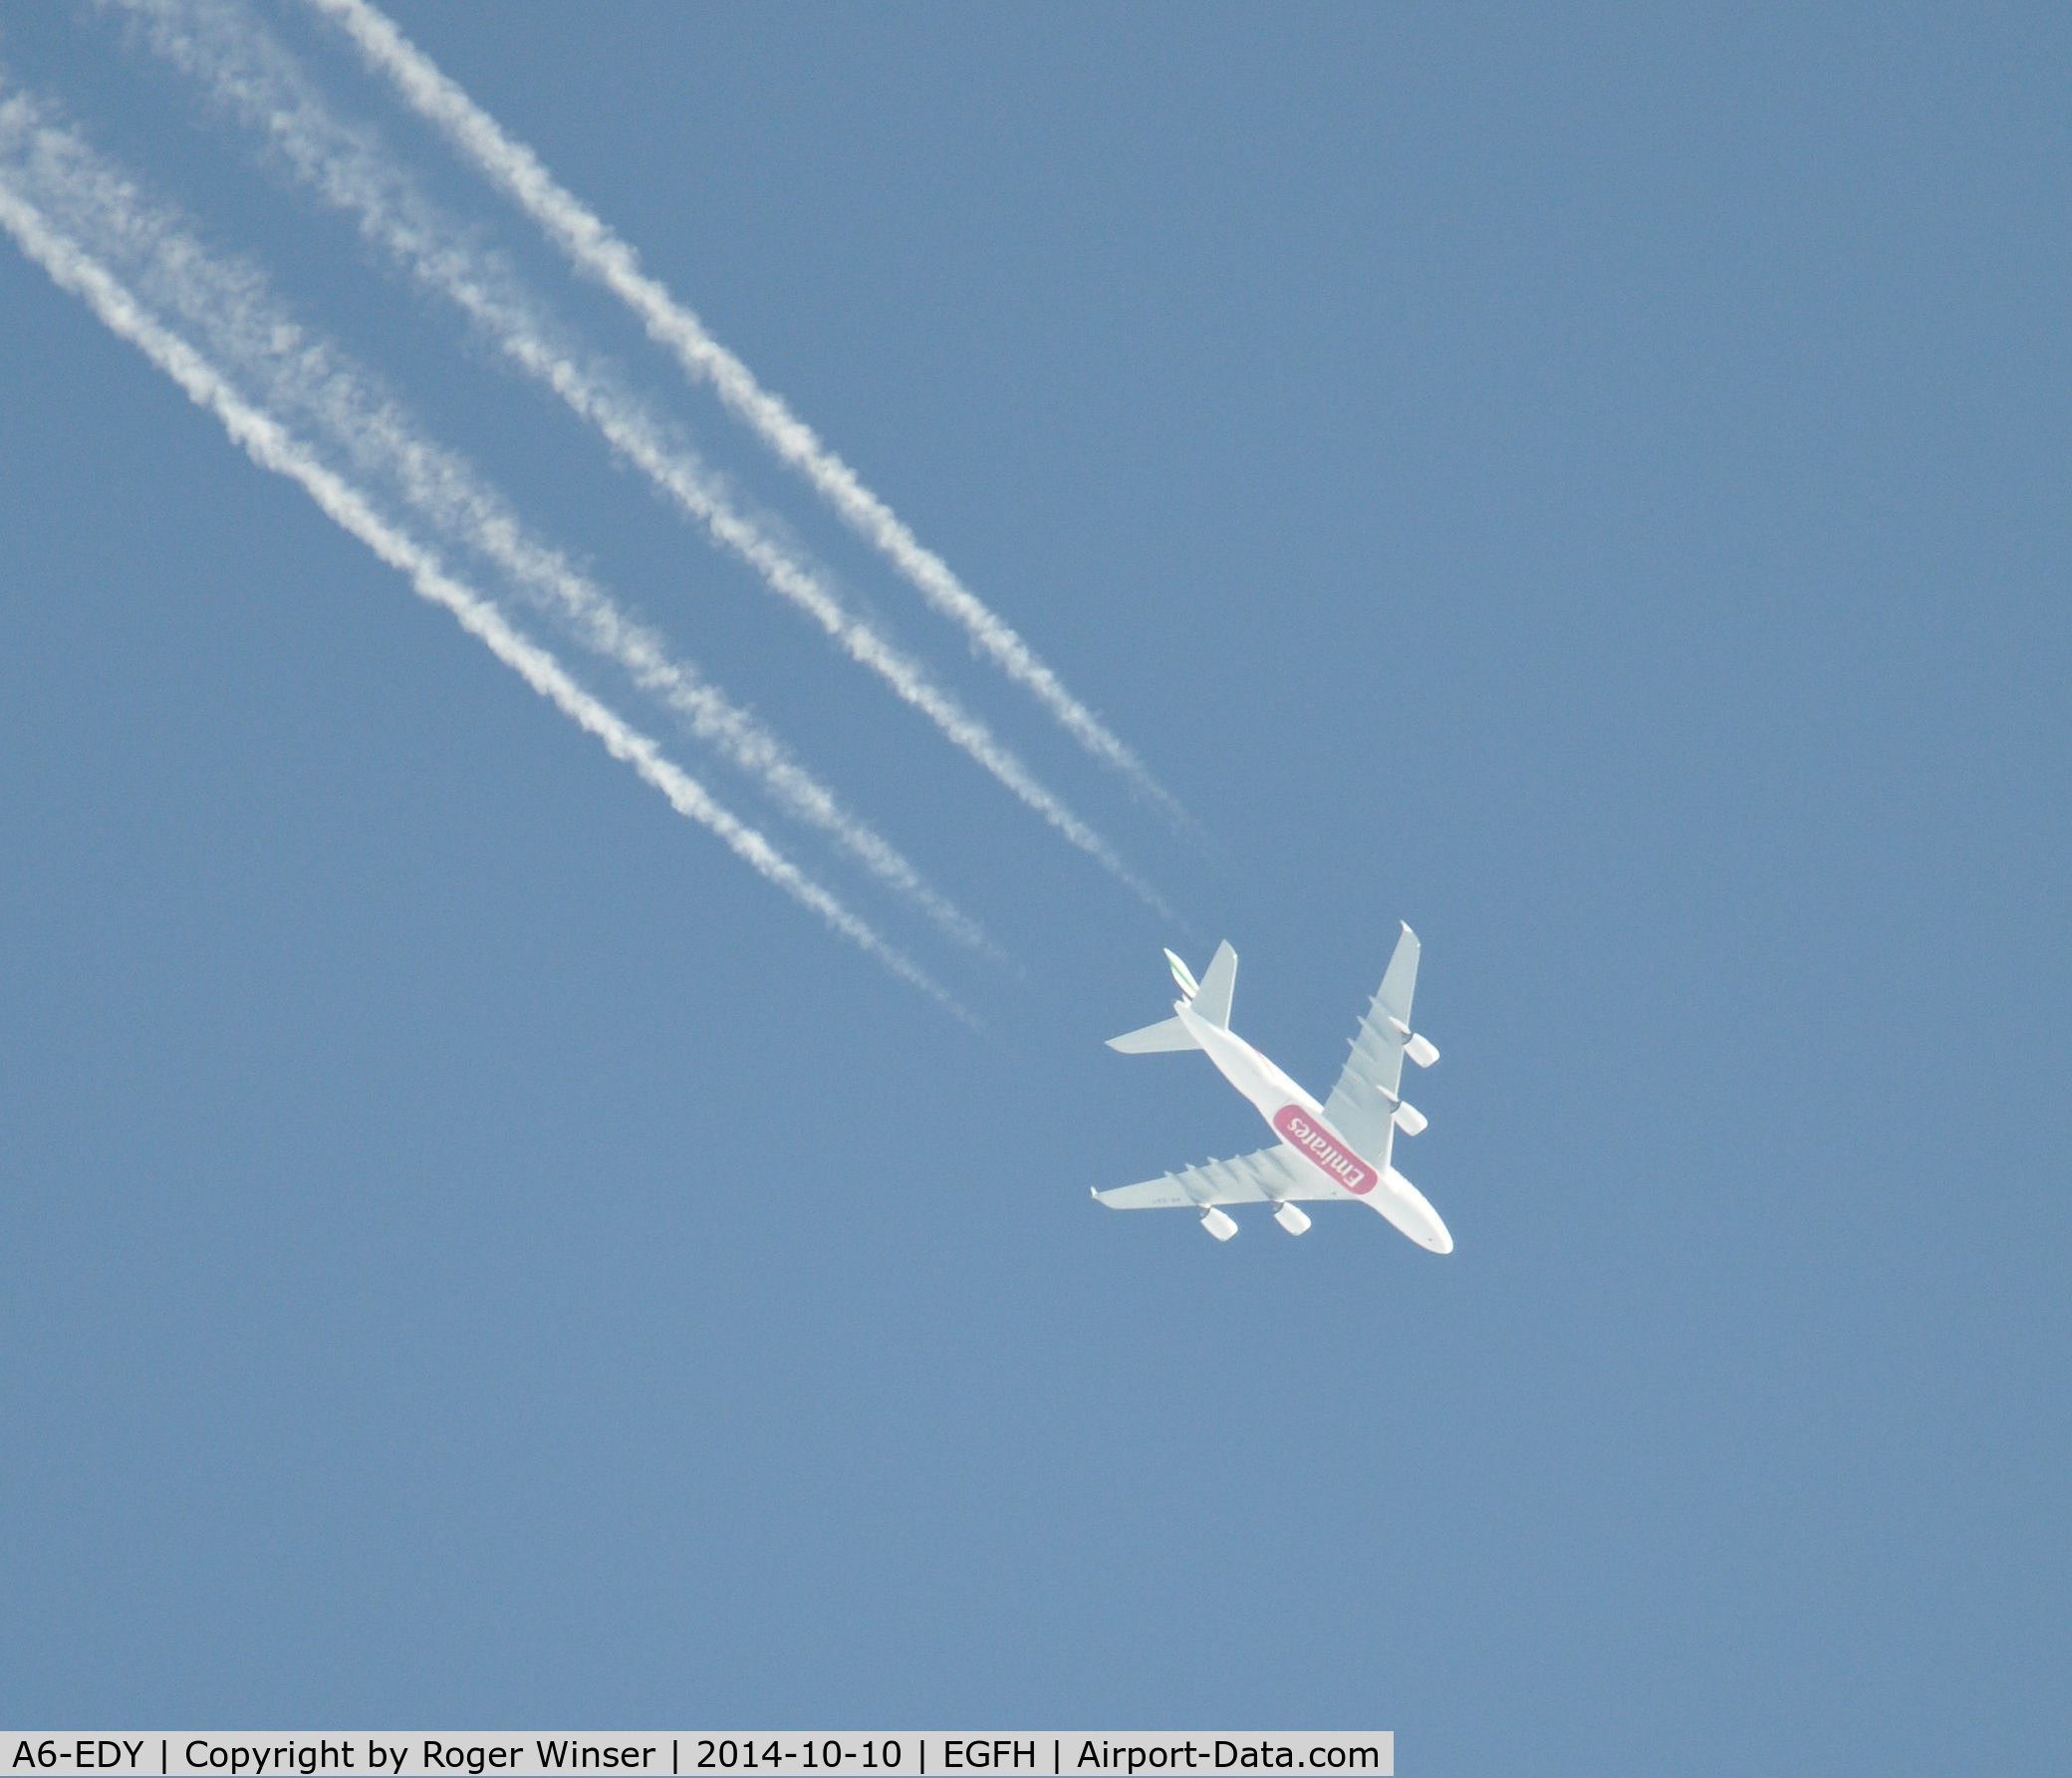 A6-EDY, 2012 Airbus A380-861 C/N 106, Emirates A380 aircraft flying east at 37000 feet over the airport.